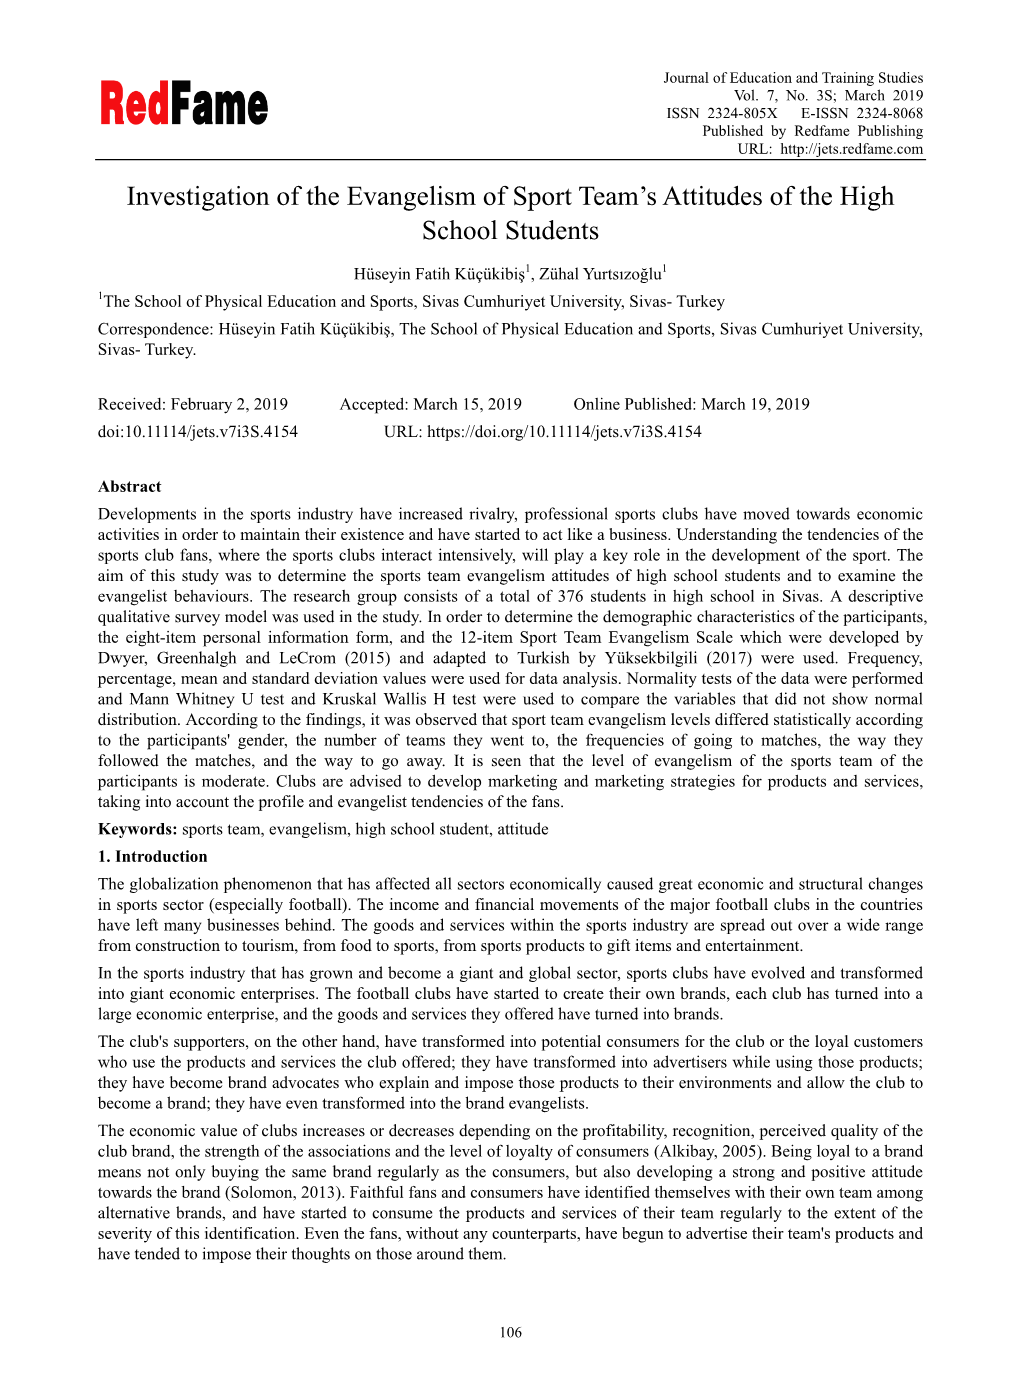 Investigation of the Evangelism of Sport Team's Attitudes of the High